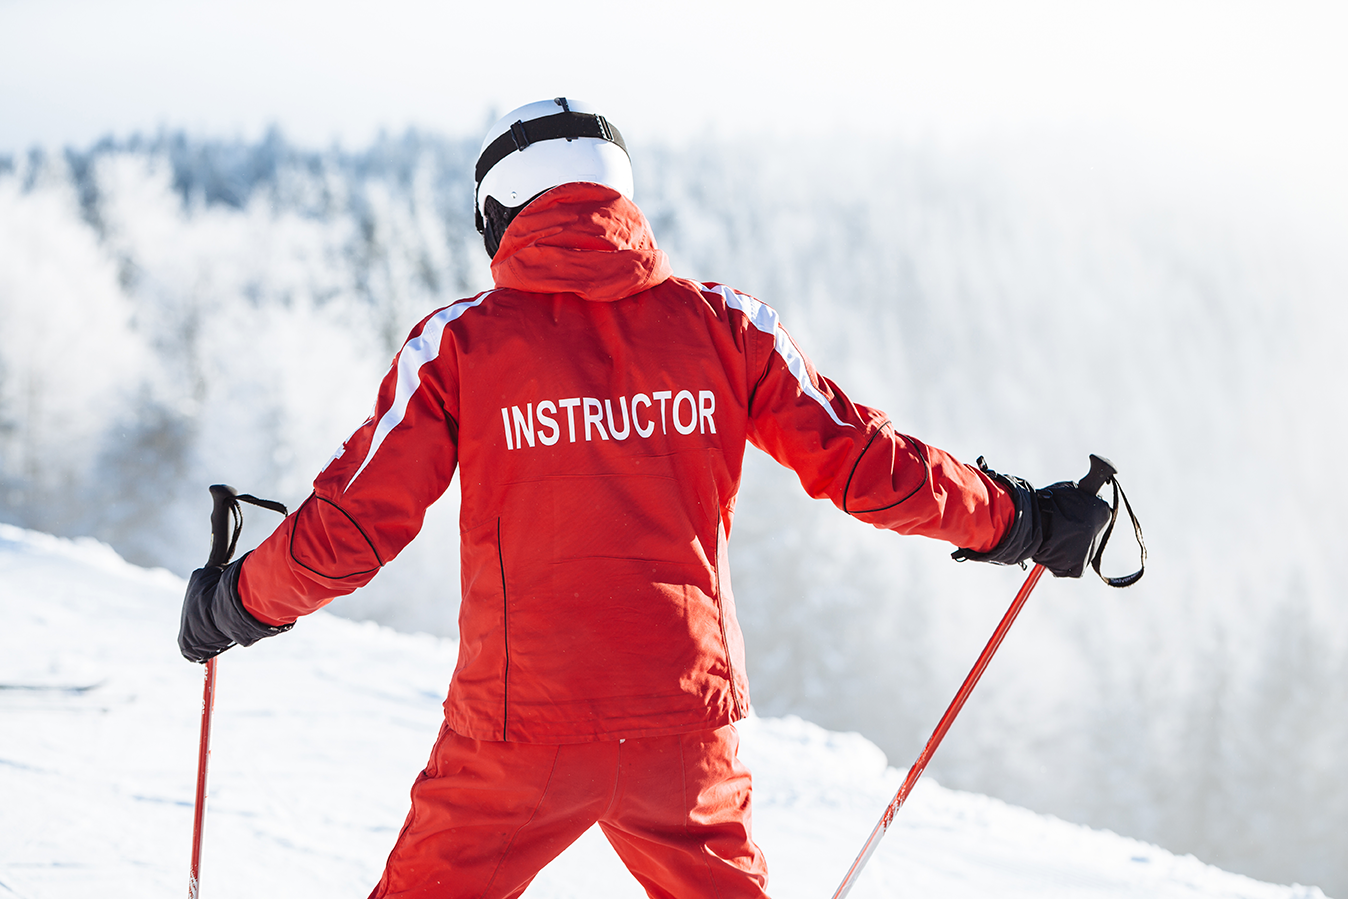 Health Karma(R) Selected by the Professional Ski Instructors of America and the American Association of Snowboard Instructors (PSIA-AASI) To Provide Virtual Health Benefits